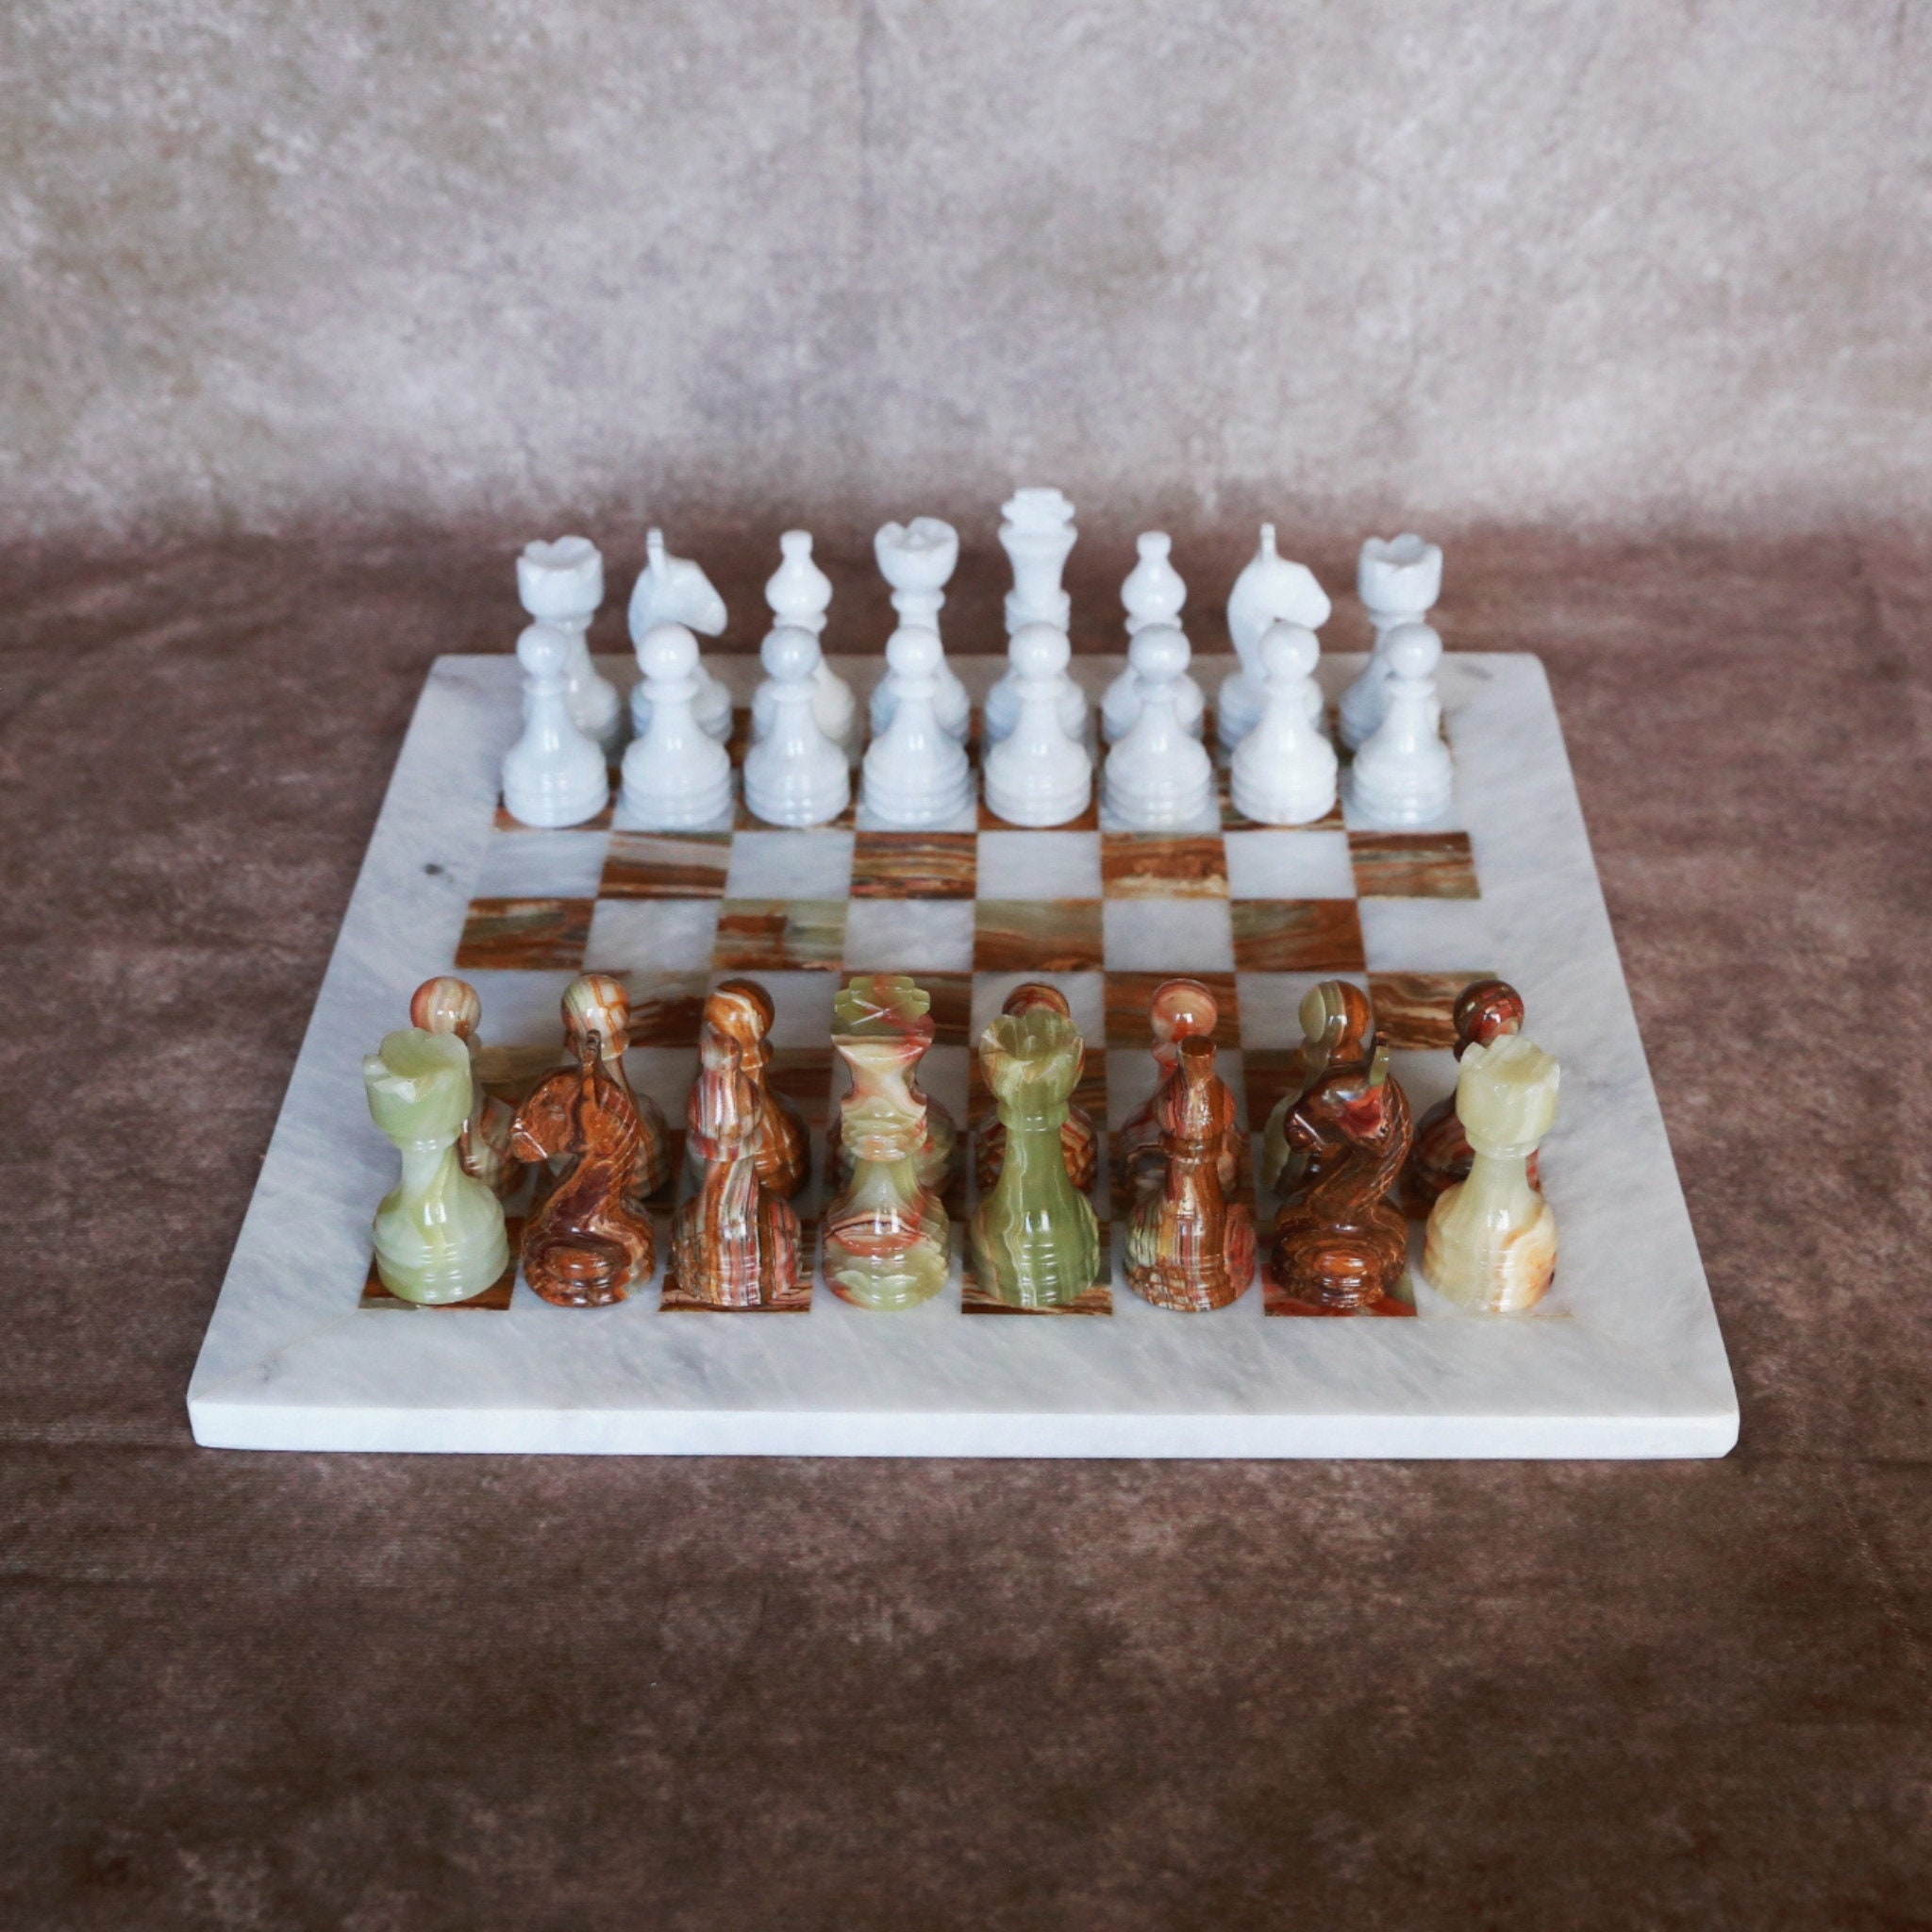 NEW Silicone Chess Mold-chess Resin Molds-chessboard Resin Mold